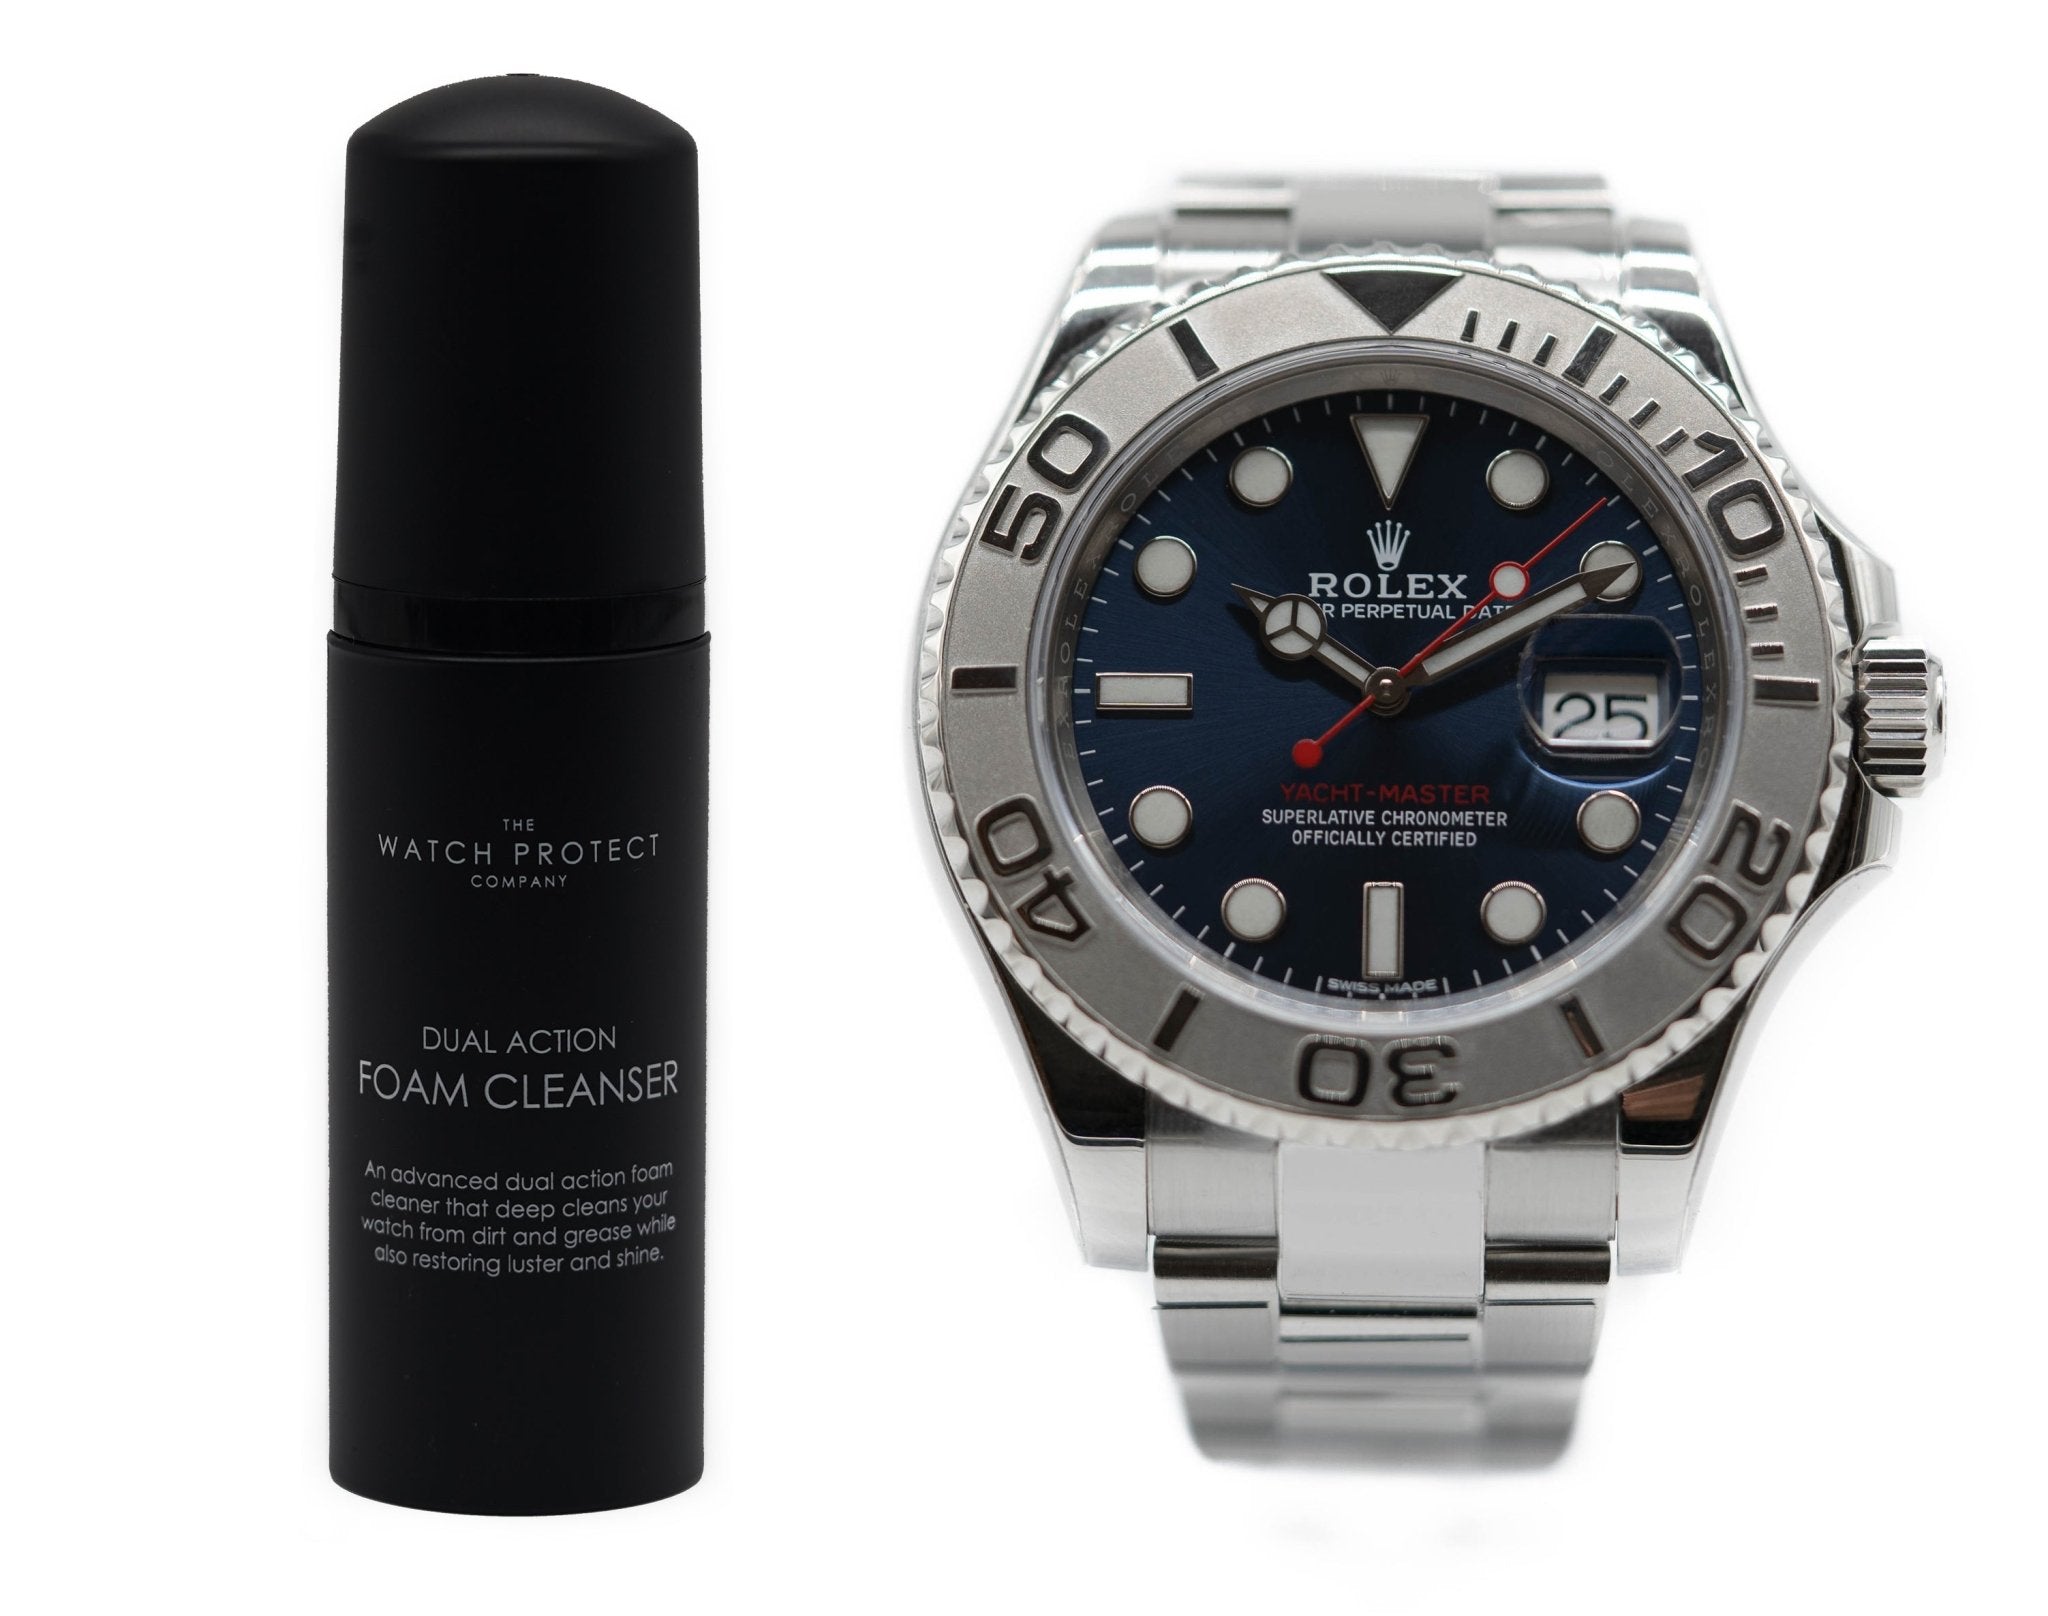 DUAL ACTION FOAM CLEANER & ROLEX YACHT MASTER 40 116621/126621 - TIER 3 - WATCH PROTECTION KIT BUNDLE - The Watch Protect Company